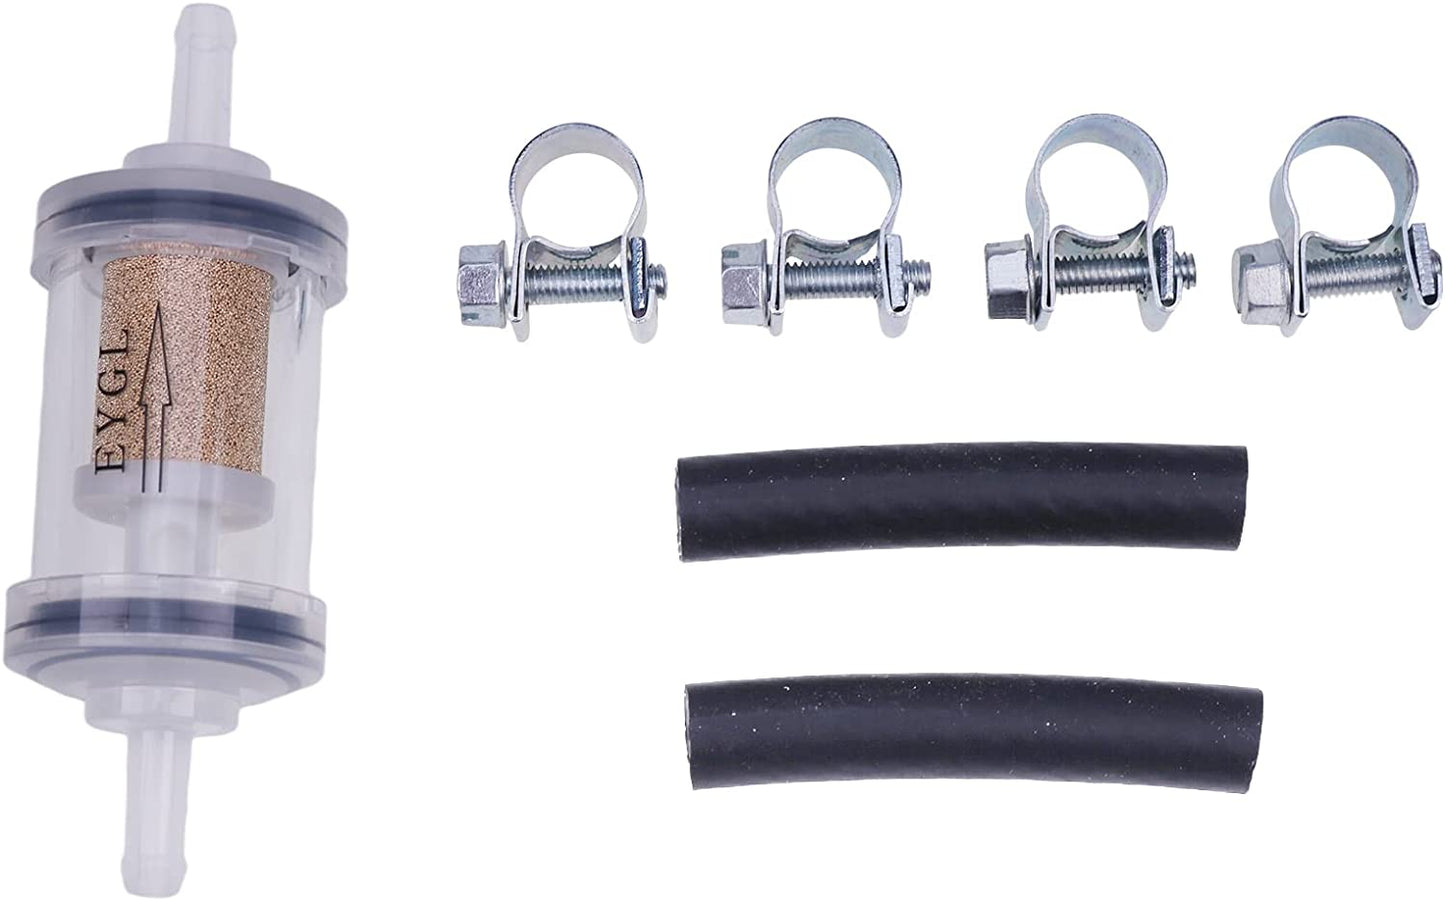 New Diesel Fuel Filter Kit with Clamps and Hoses with 297 Micron Bronze Element Compatible with Webasto Eberspacher Parking Heater Fuel System